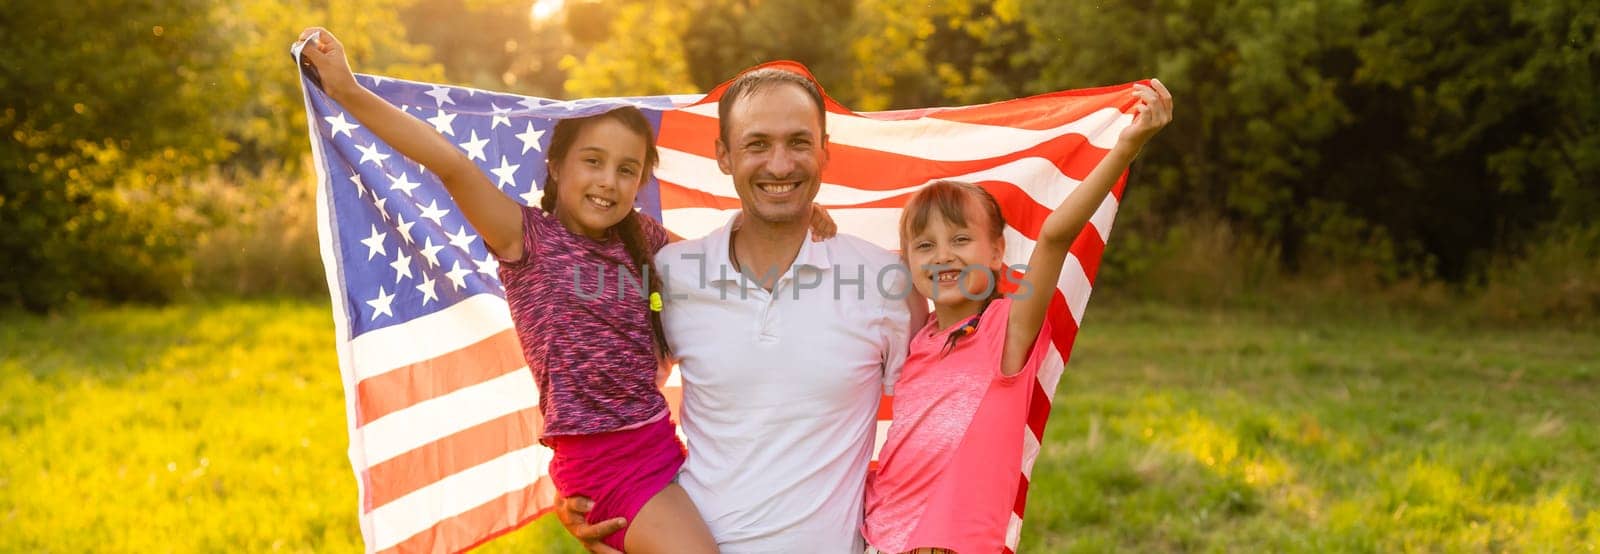 parents and child with American flag are playing with a colorful kite. mother, father and their little daughters celebrate together 4th of July outdoors in foggy day. Independence Day of USA concept. by Andelov13